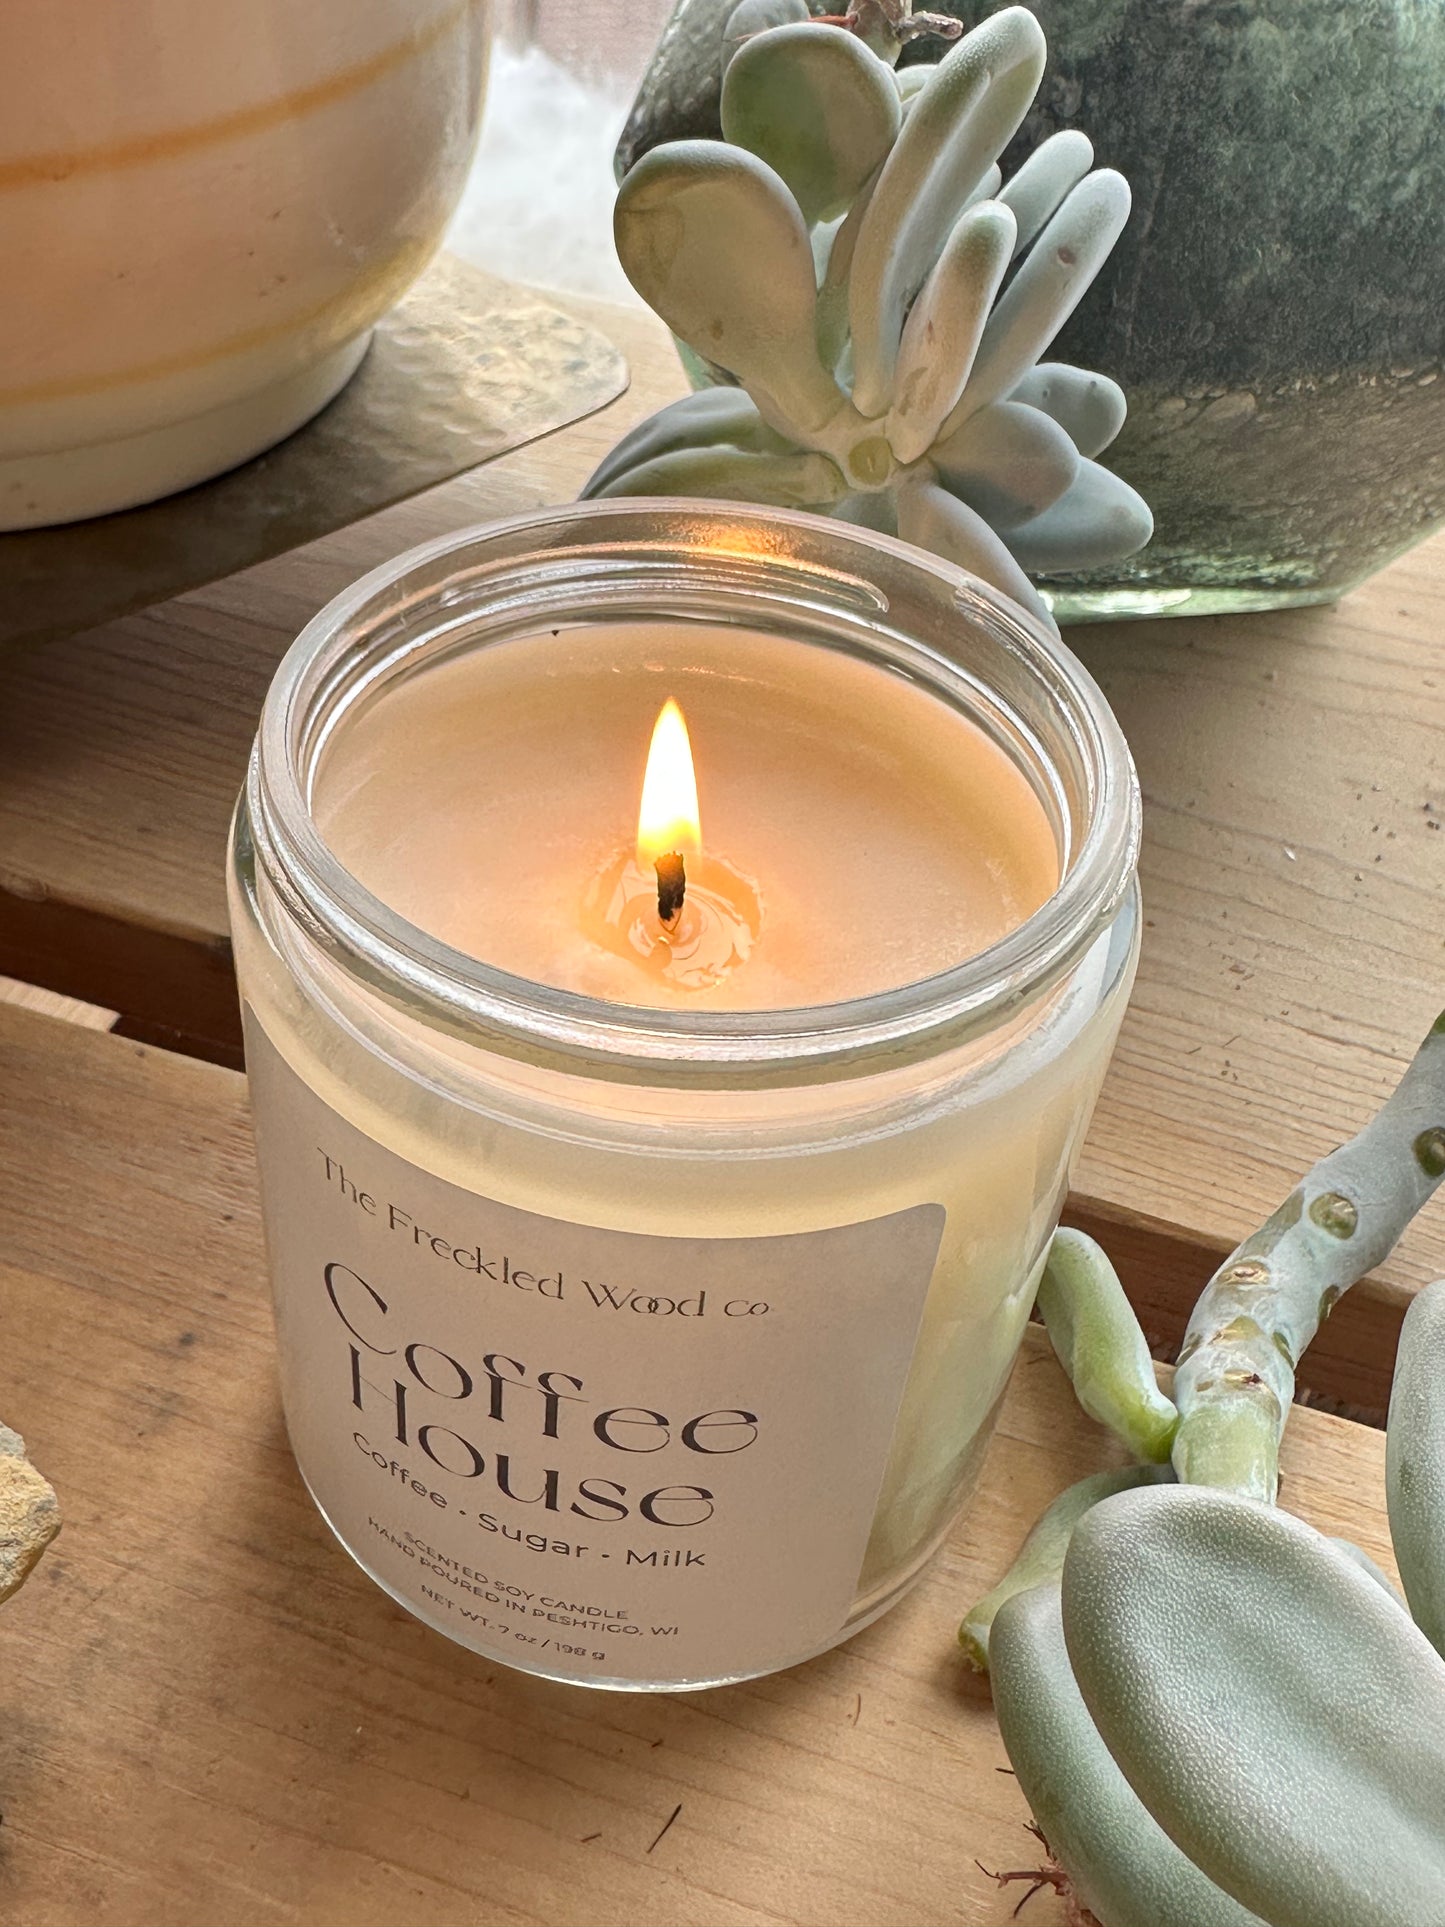 Rosemary & Sage Candle